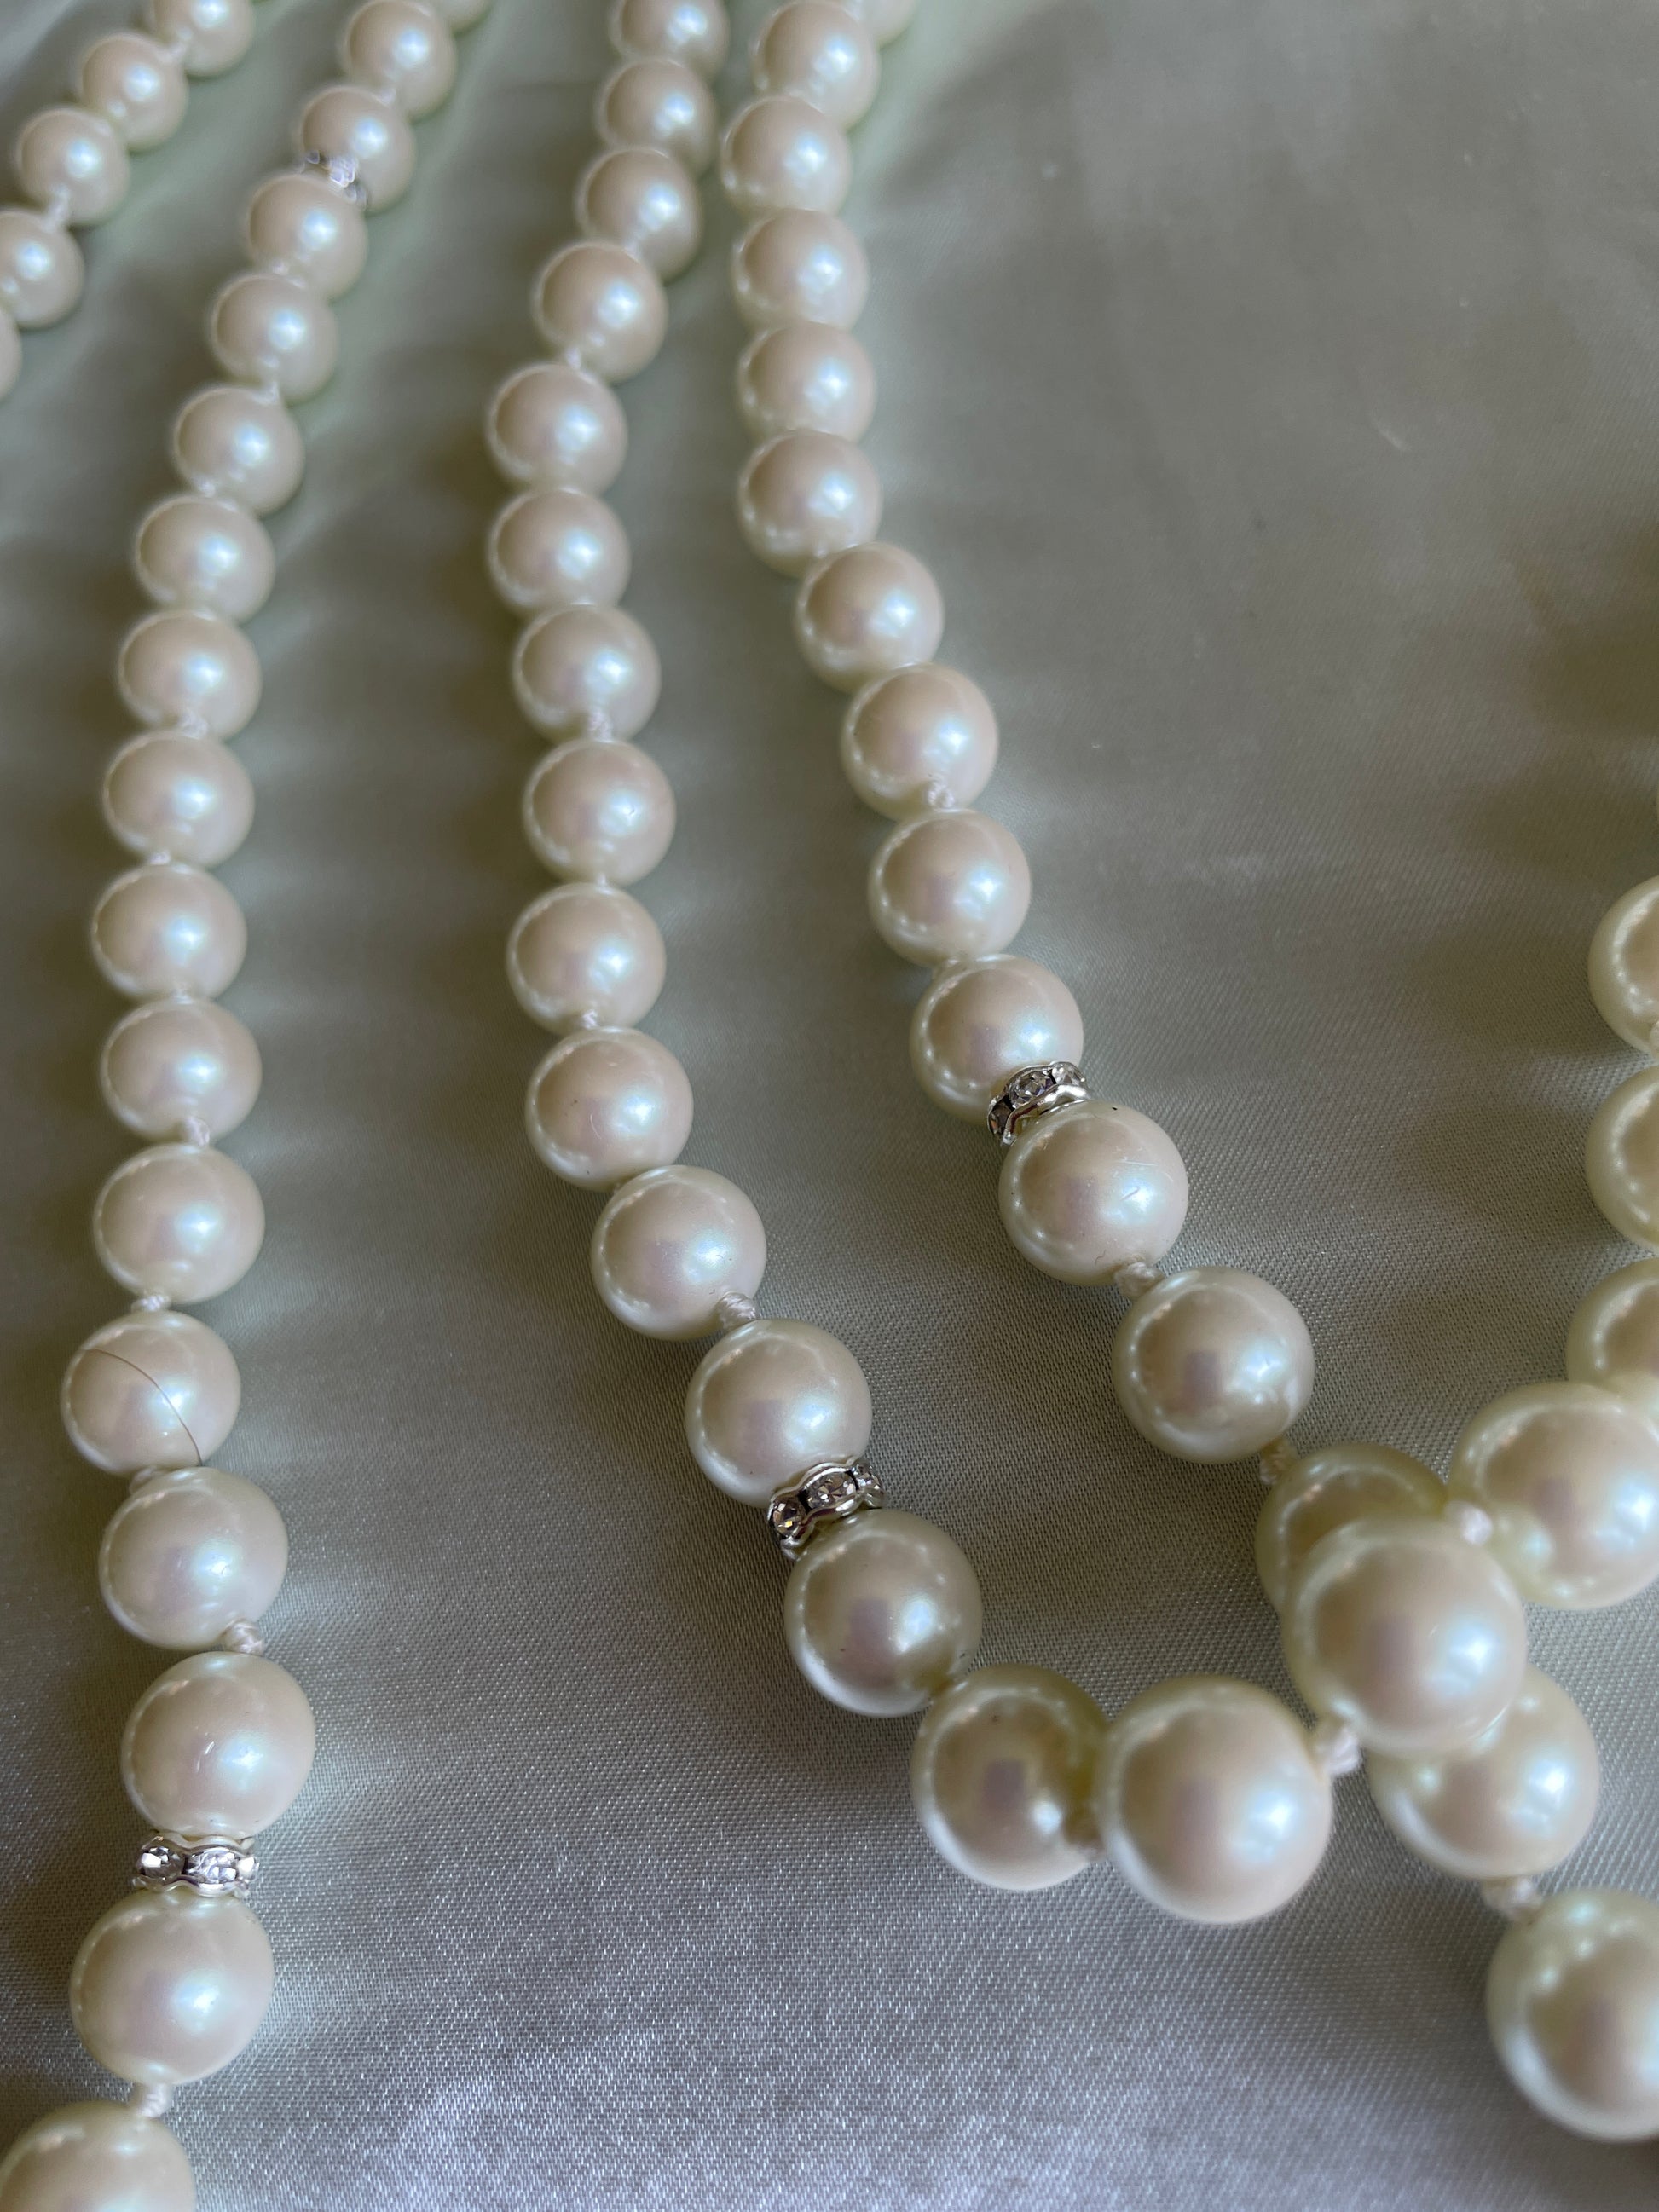  80s Faux Pearl Glass Stunning Opera Length Wrap Necklace